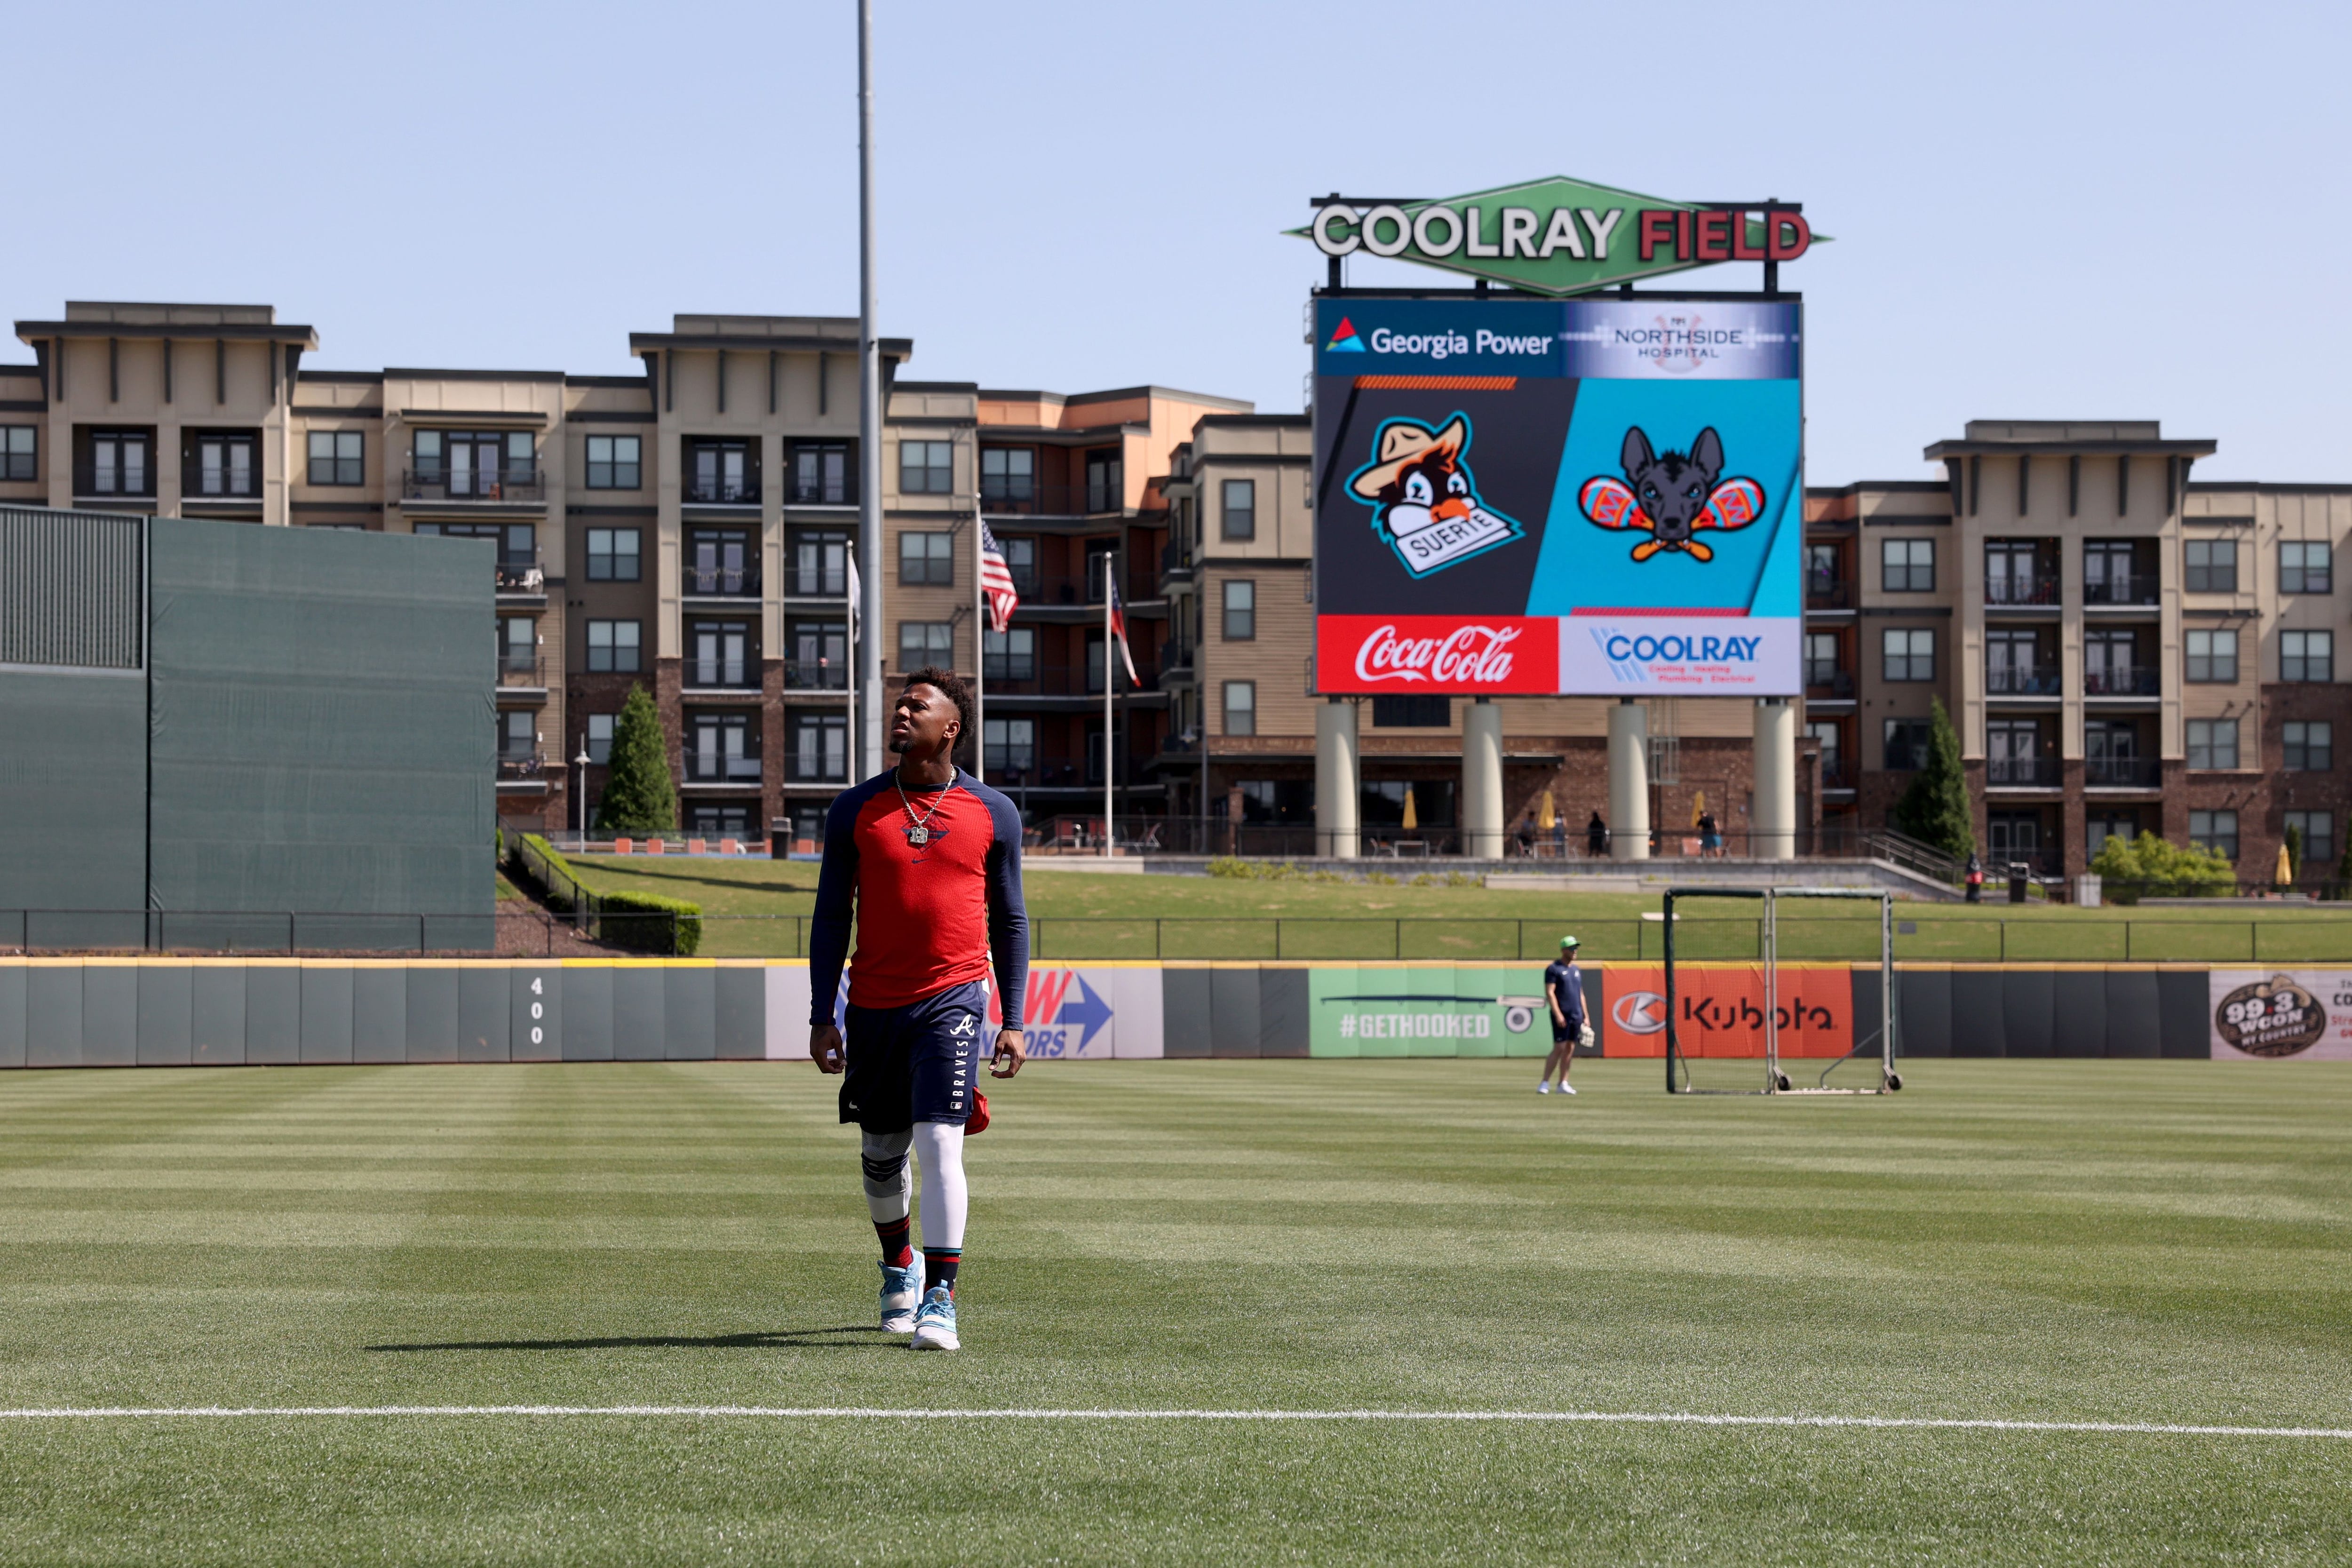 LAWRENCEVILLE, GA - APRIL 27: Atlanta Braves right fielder Ronald Acuna,  Jr. makes a rehab start for the Gwinnett Stripers as they play the Norfolk  Tides on April 27, 2022 at Coolray